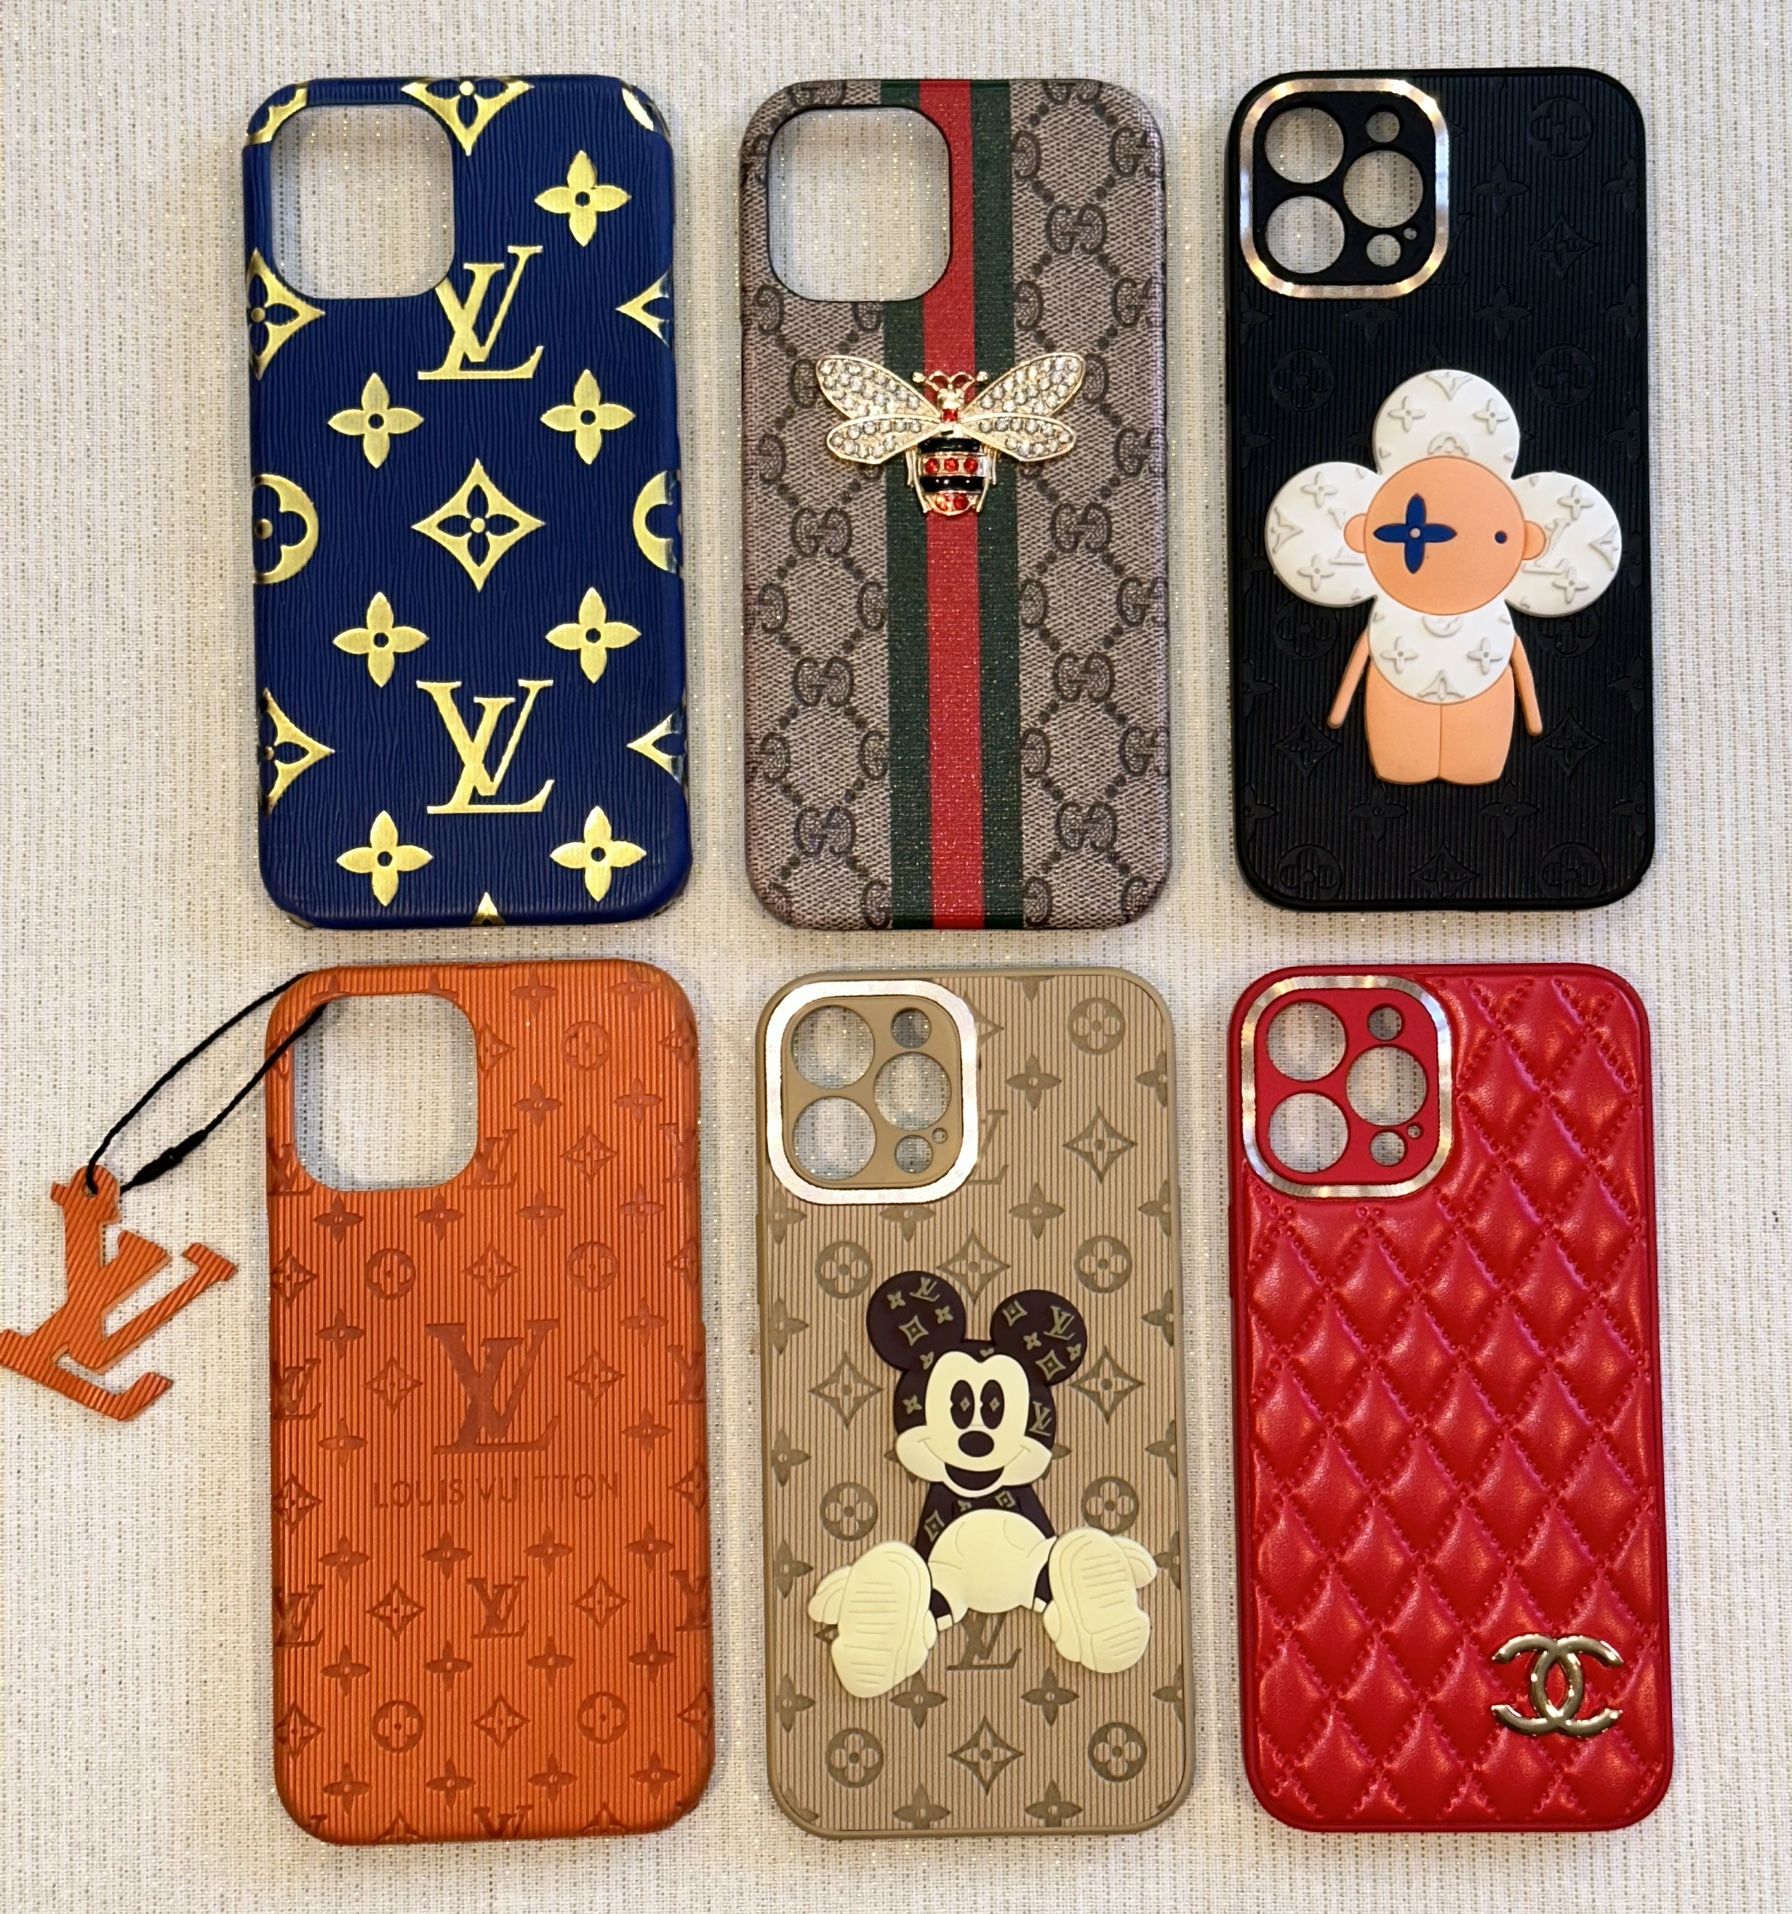 Apple iPhone 12 Pro Max Fashion Style Covers